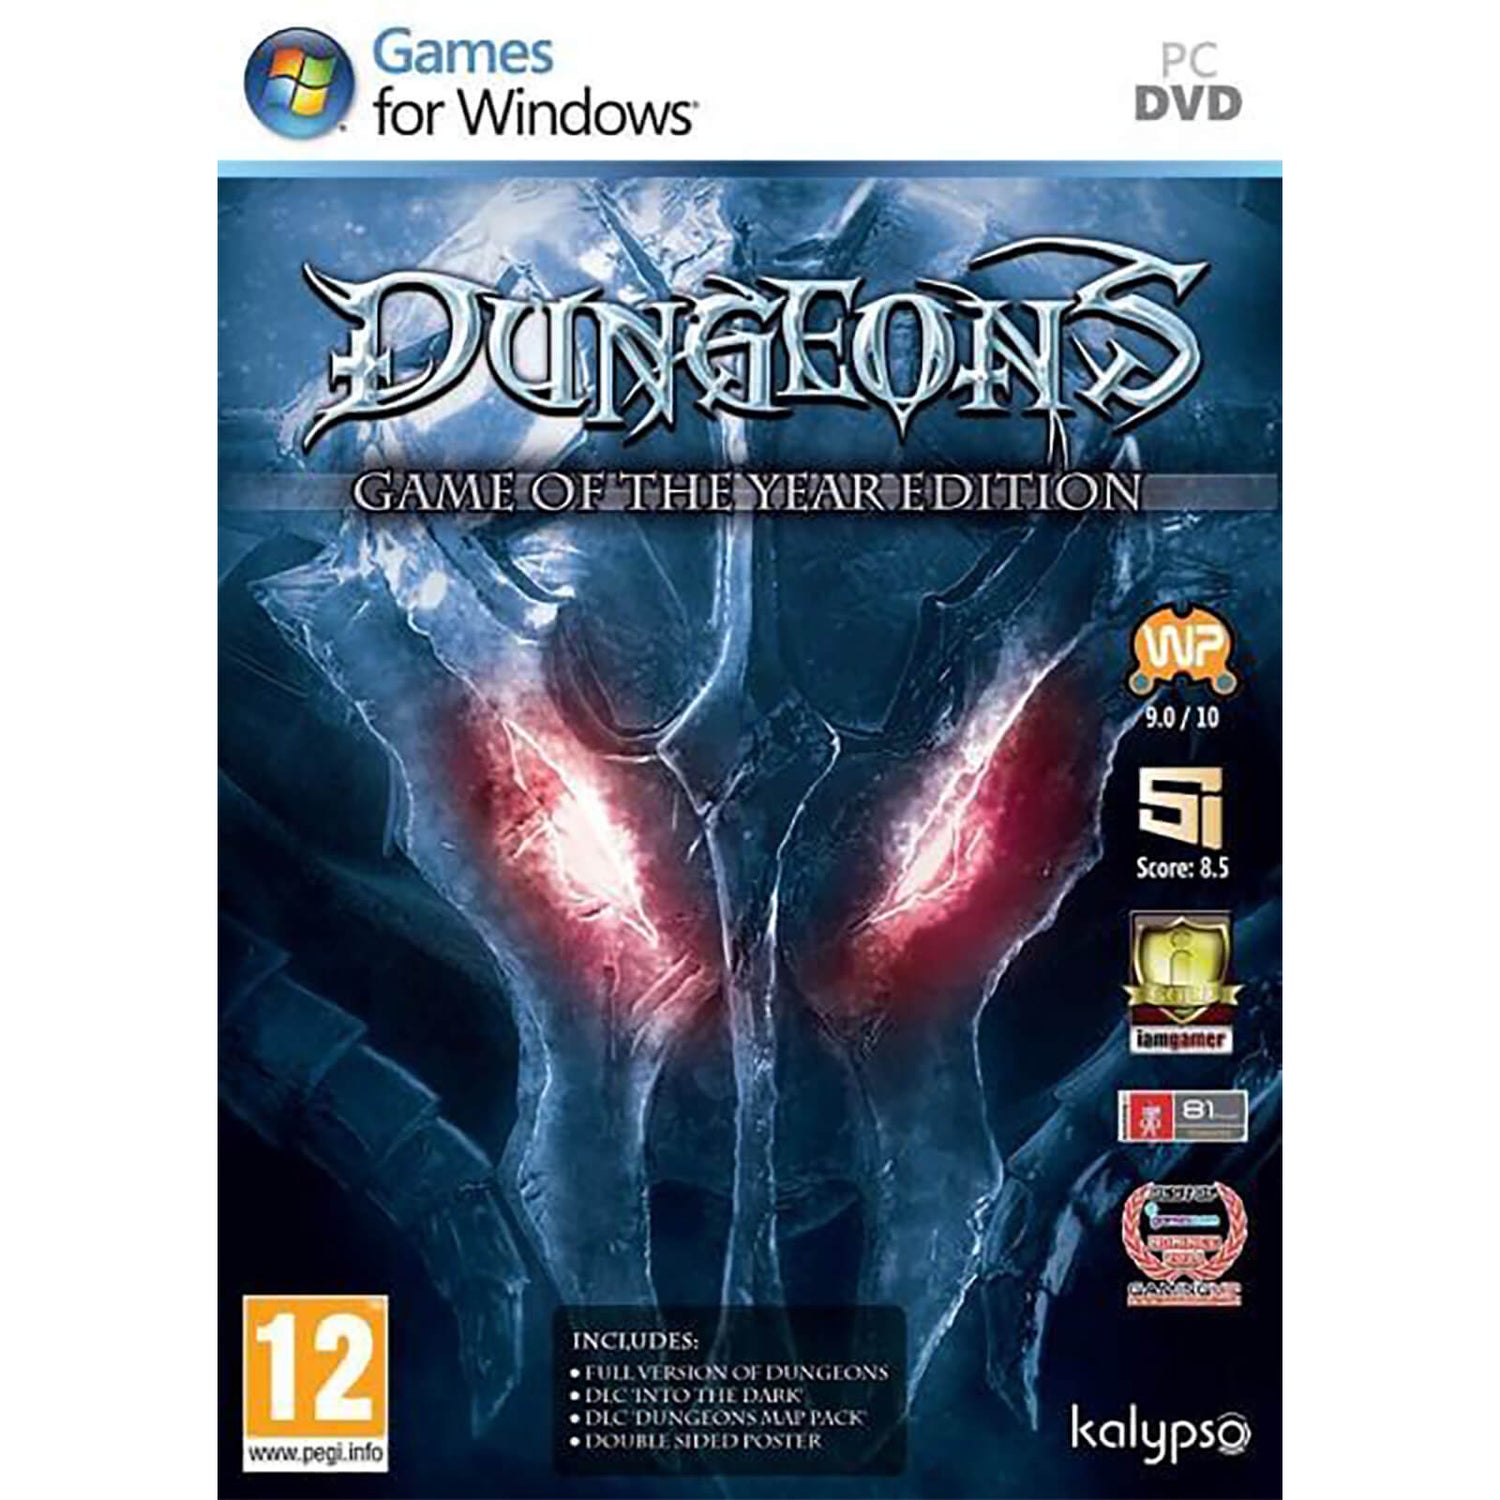 Dungeons: Game of the Year Edition